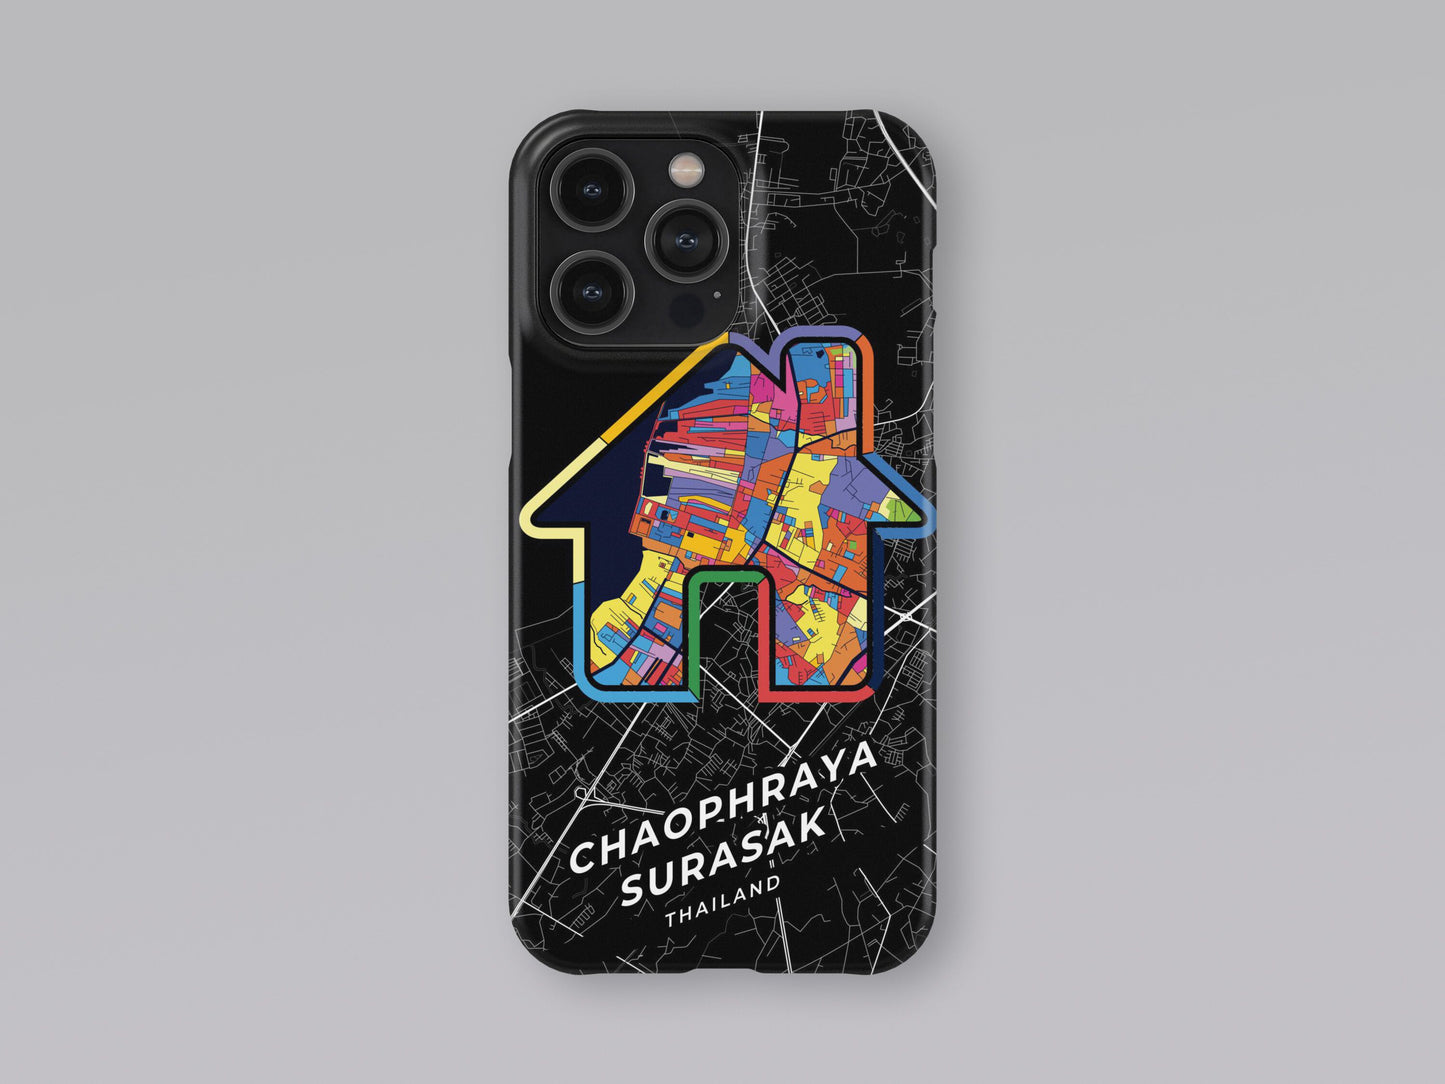 Chaophraya Surasak Thailand slim phone case with colorful icon. Birthday, wedding or housewarming gift. Couple match cases. 3